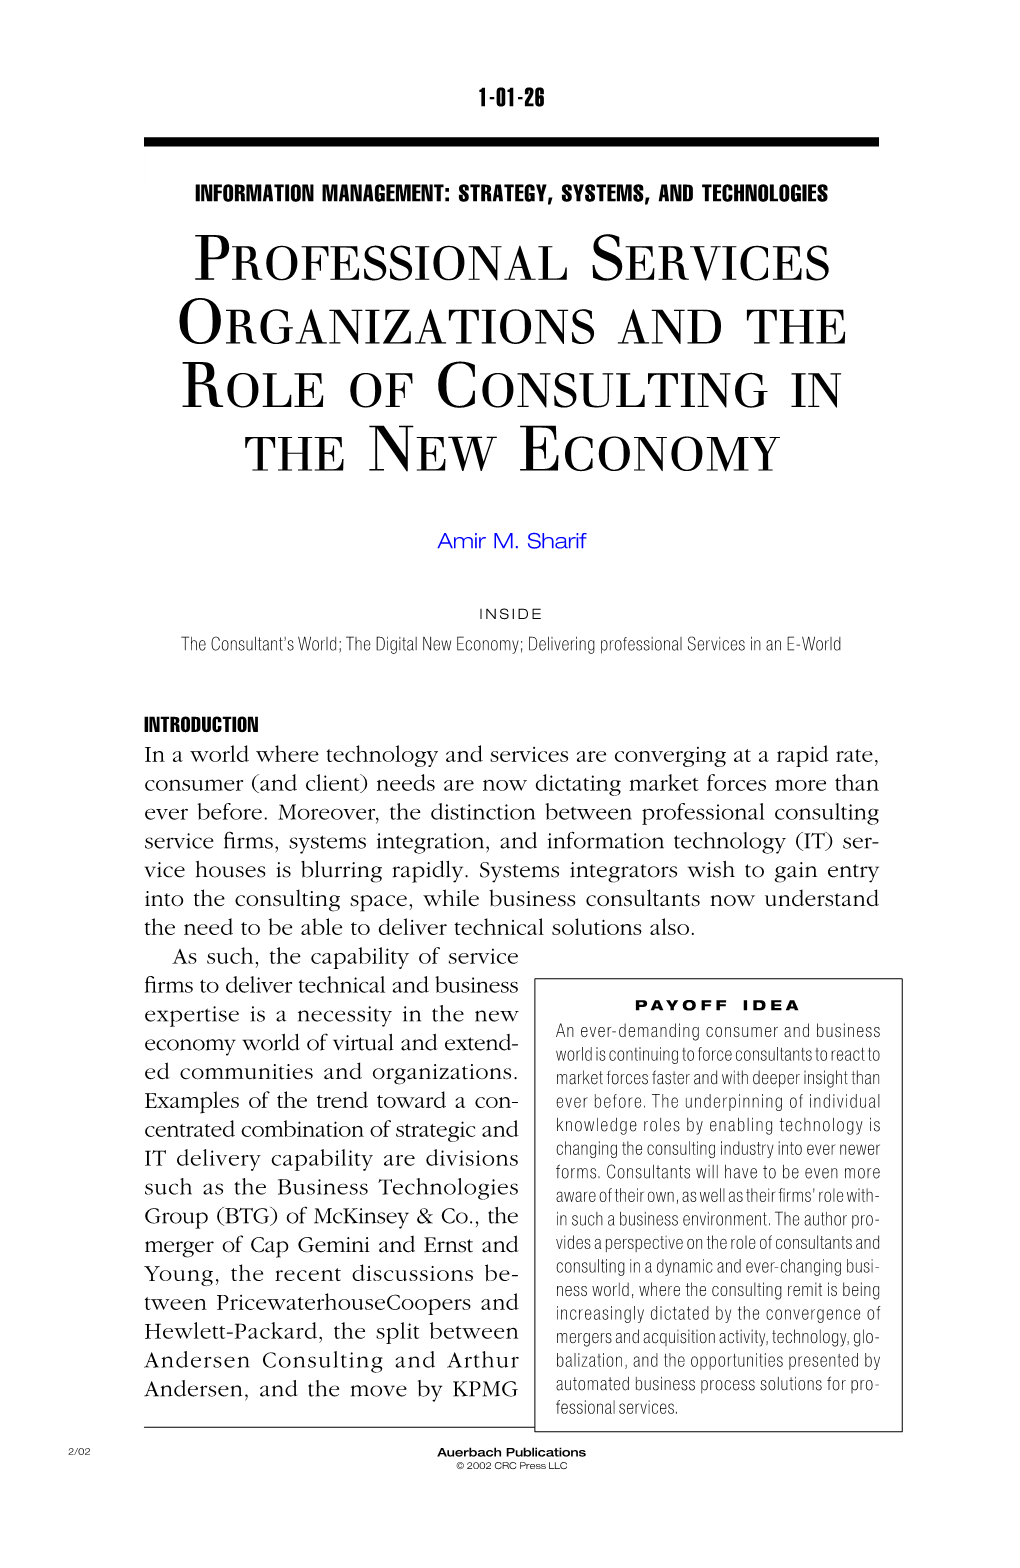 Professional Services Organizations and the Role of Consulting in the New Economy